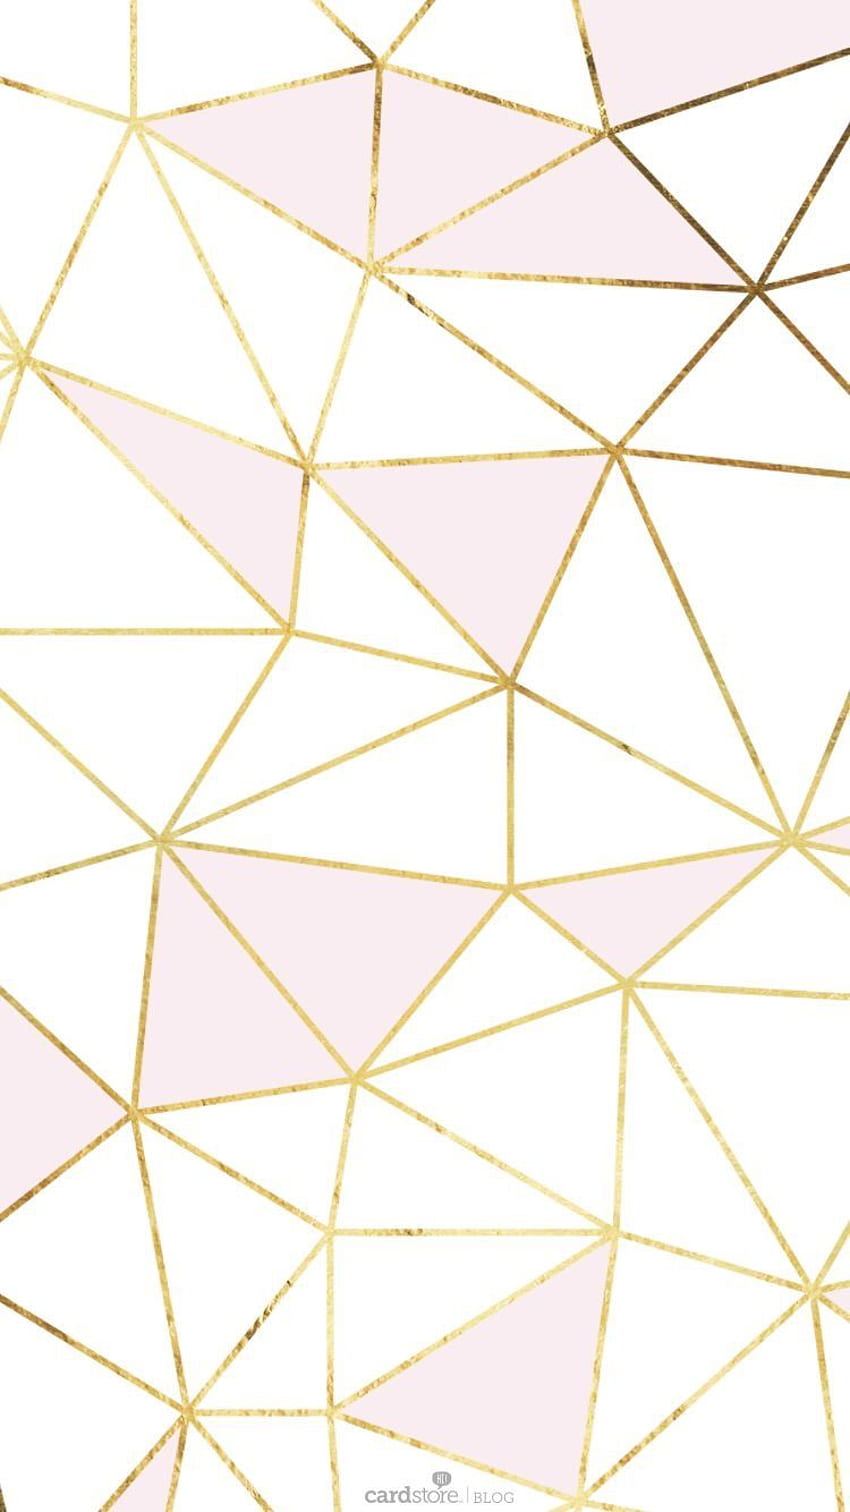 Cute Pale Pink and White Triangles with Gold Trim iPhone HD phone wallpaper